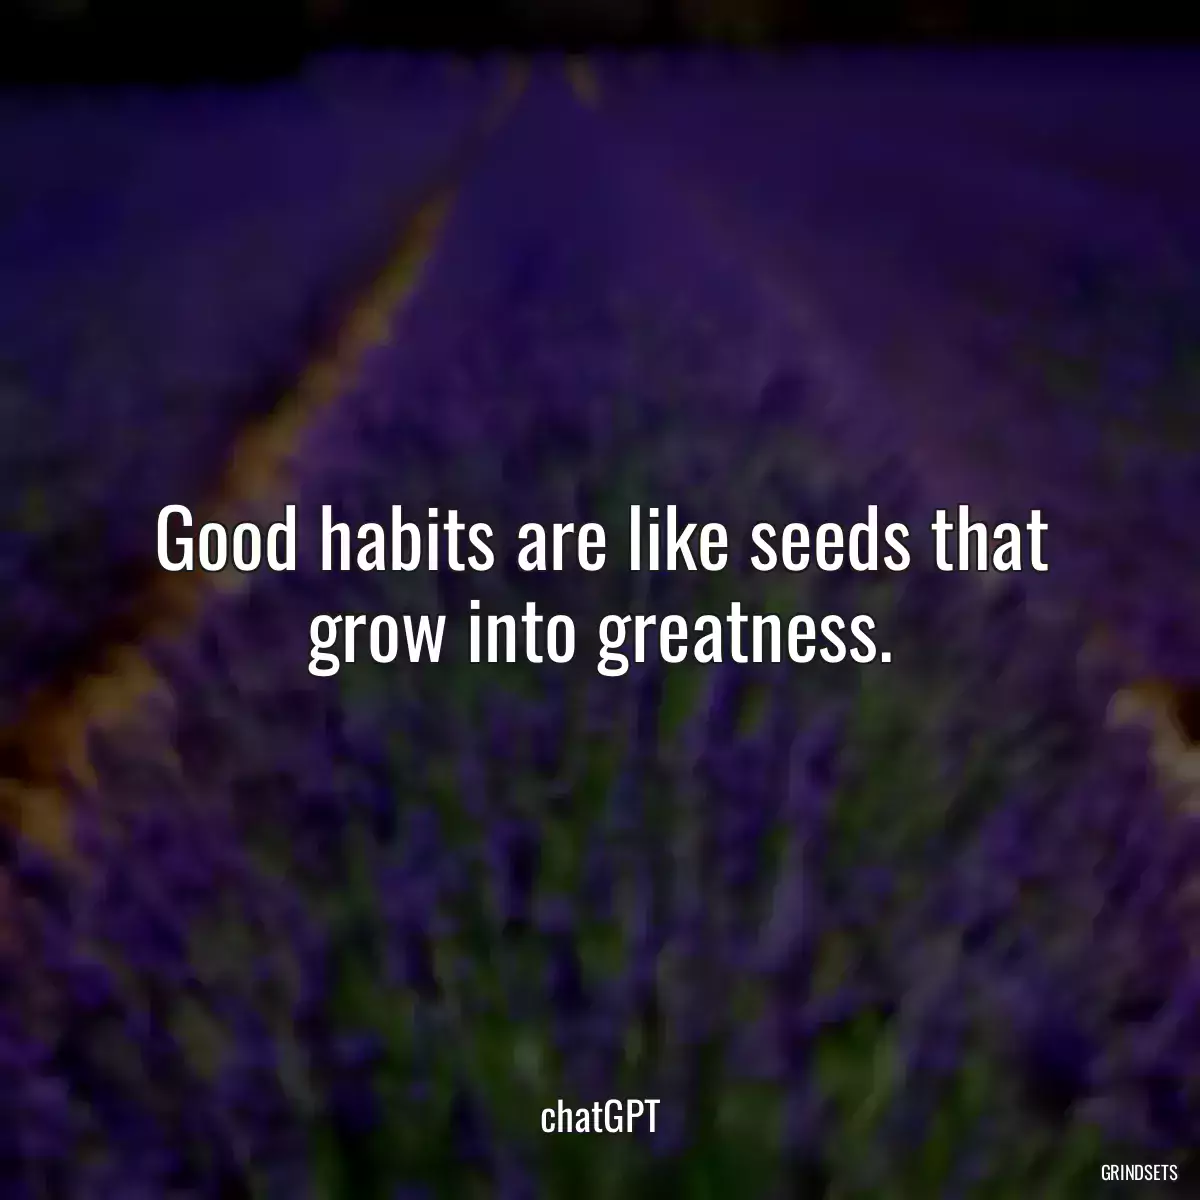 Good habits are like seeds that grow into greatness.